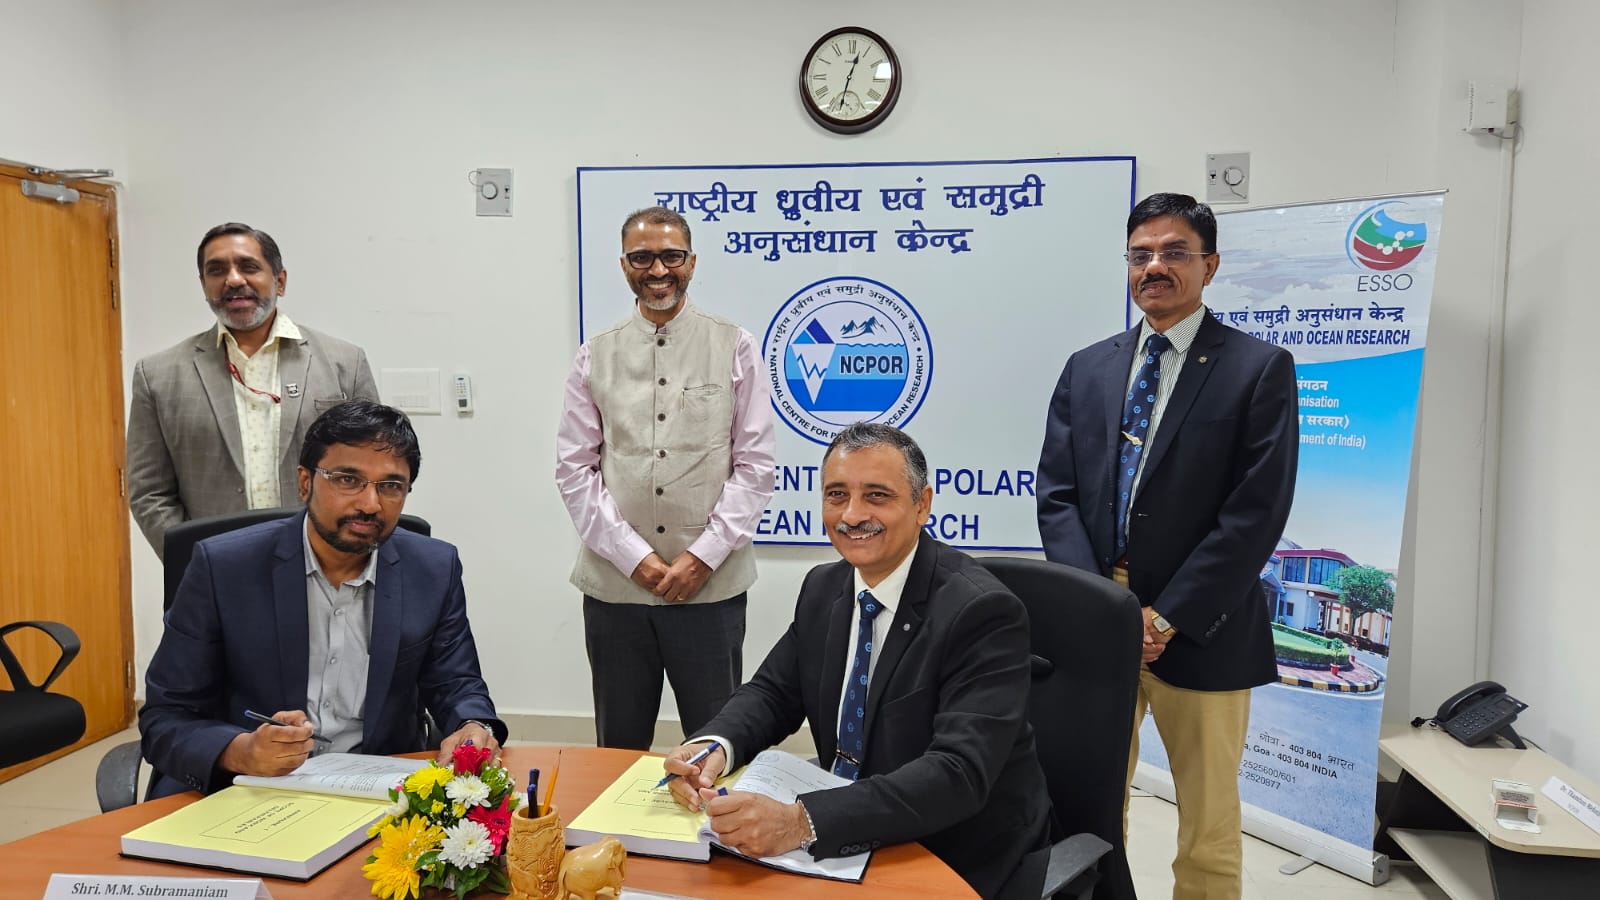 Big Boost to ‘Aatmanirbhar Bharat’: GRSE Signs Rs 840 Cr Deal with NCPOR for Ocean Research Vessel on 16 Jul 24 - Thumbnail